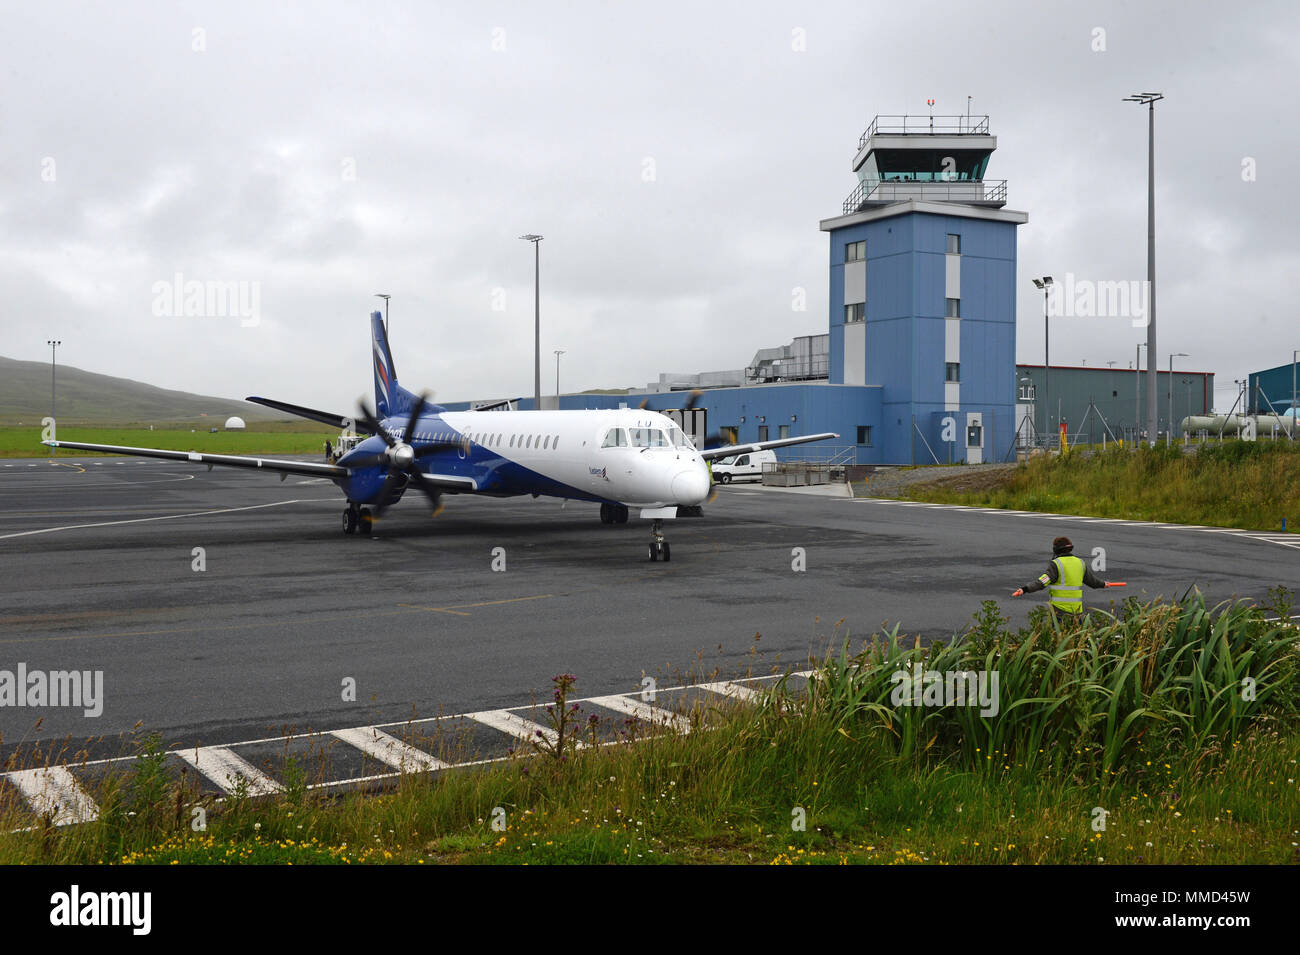 Scatsta airport on the Shetland Islands that support the oil and gas industry by flying workers out to the oil rigs in the north sea Stock Photo